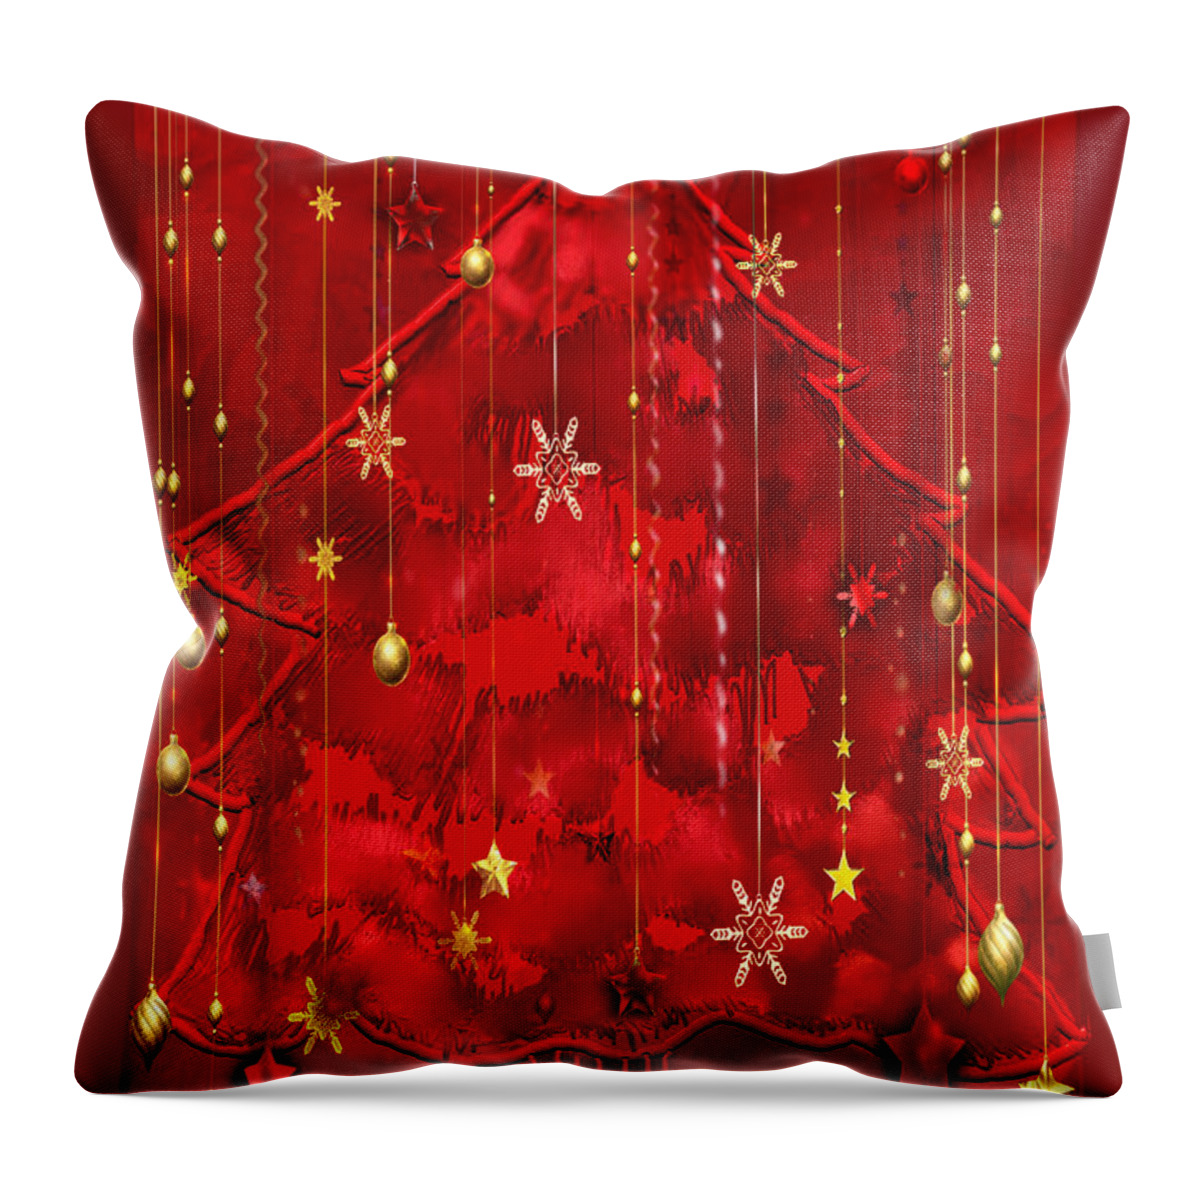 Tree Throw Pillow featuring the digital art Red Christmas Tree by Arline Wagner